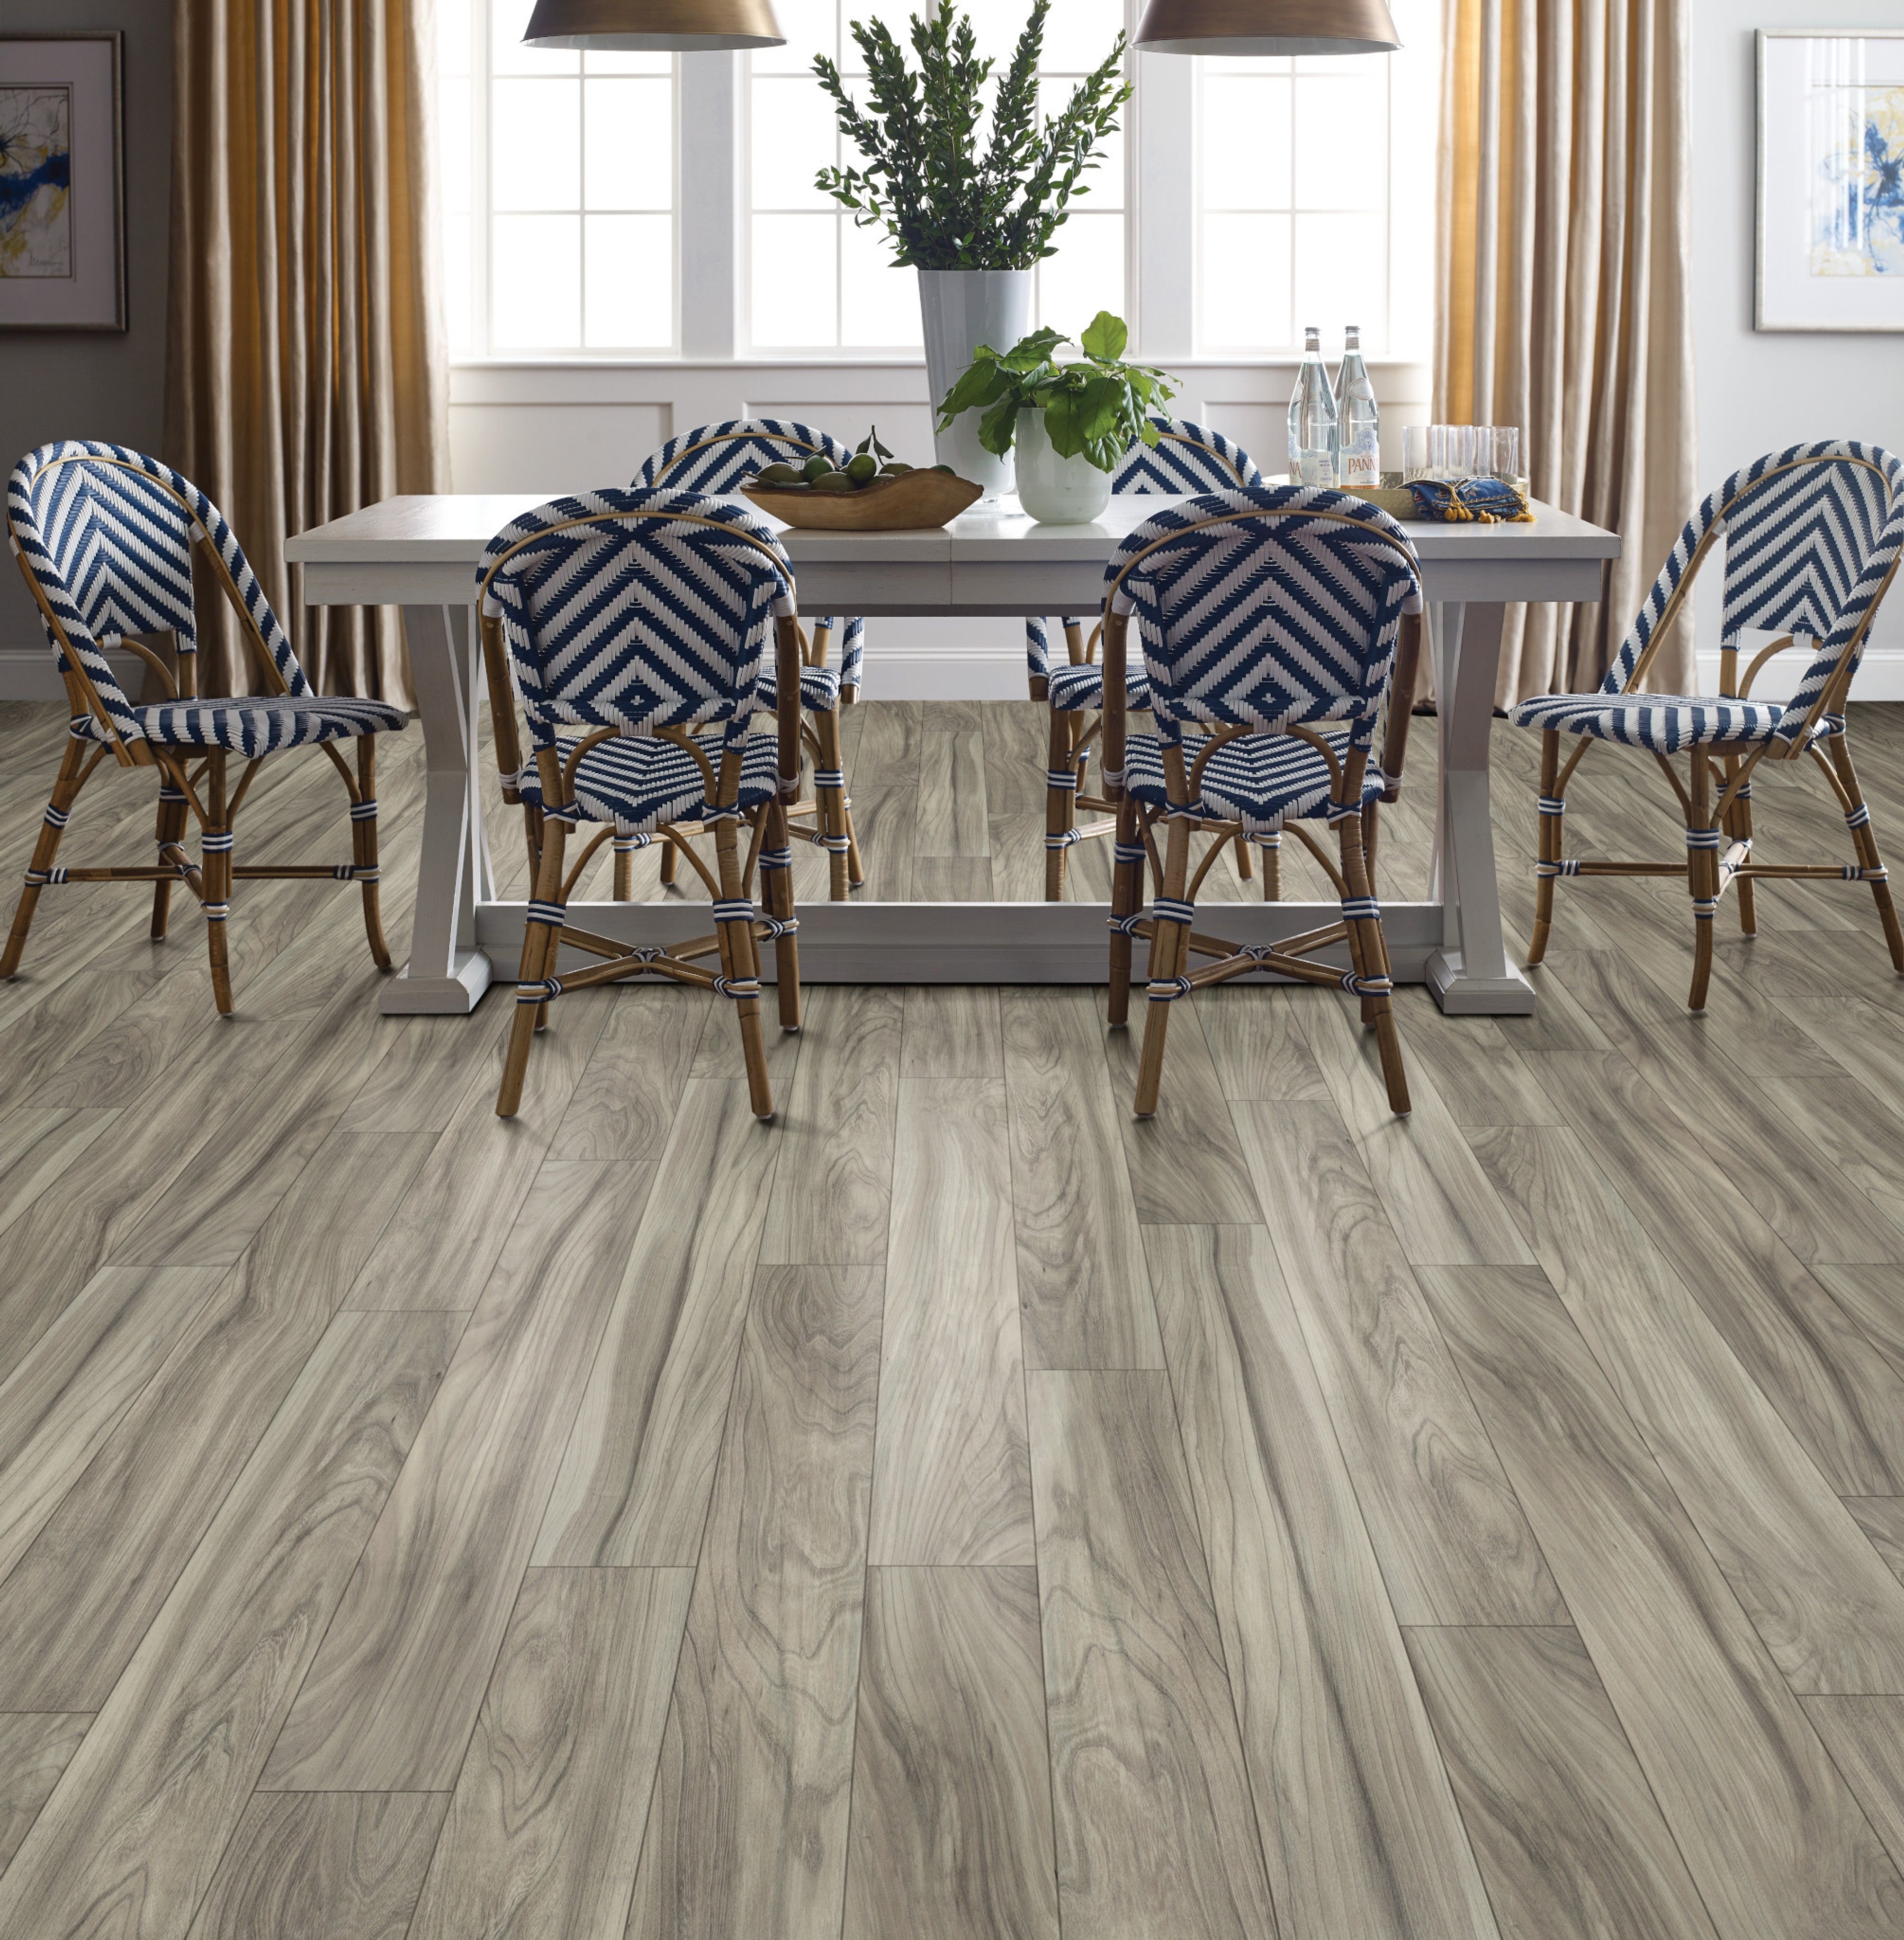 Dining room with wood-look laminate flooring from Carpet City & Flooring Center in the Fairfield, CT area